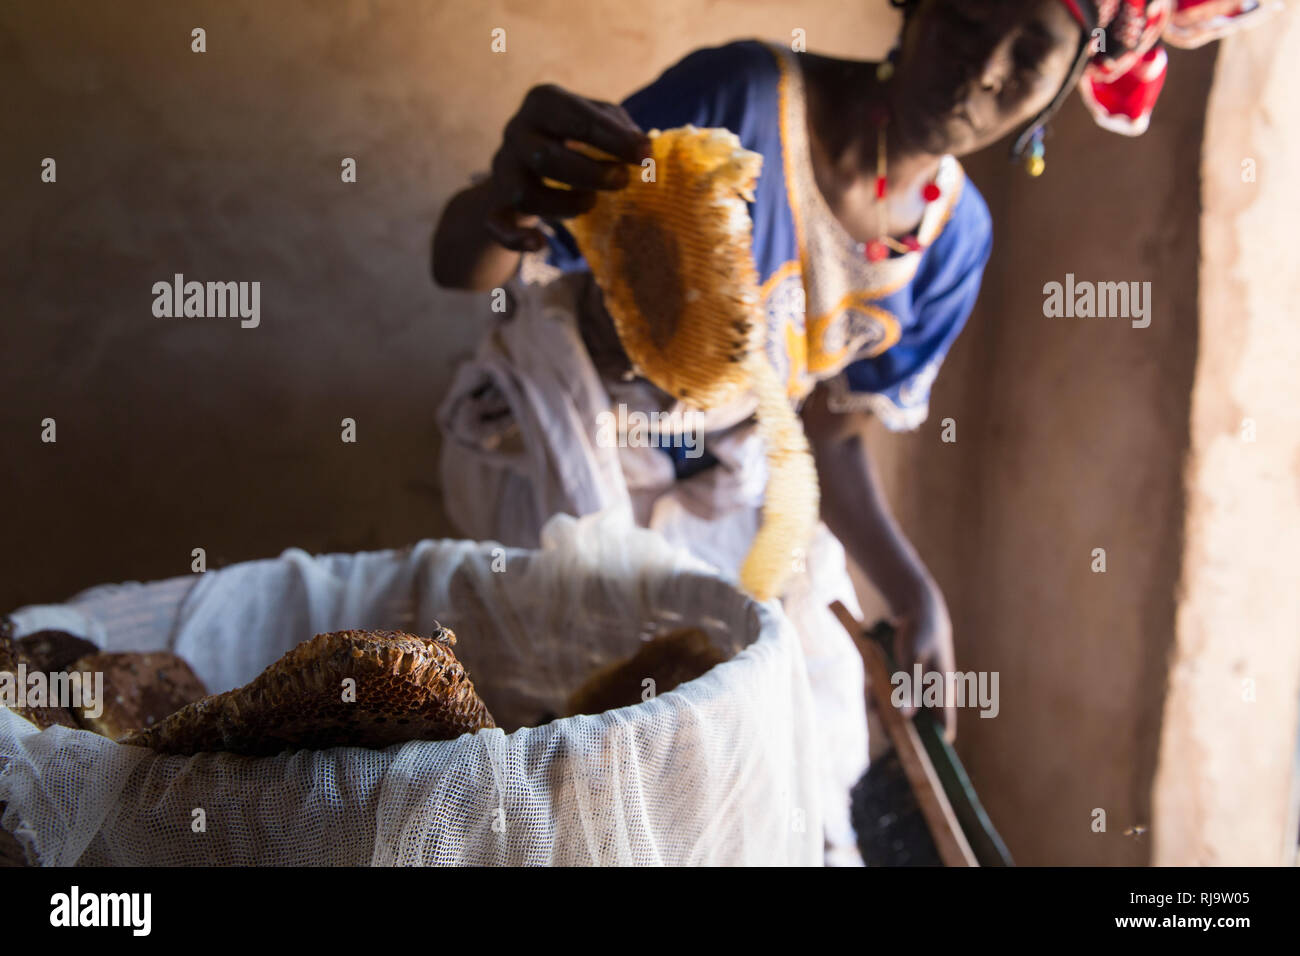 Bissiga Village, Yako, Burkina Faso, 29th November 2016; Tene Tiendrebeogo a member of the Women's Forest Livelihood project prepares to extract honey from the honey combs she has just collected from one of the group's 10 hives. Stock Photo